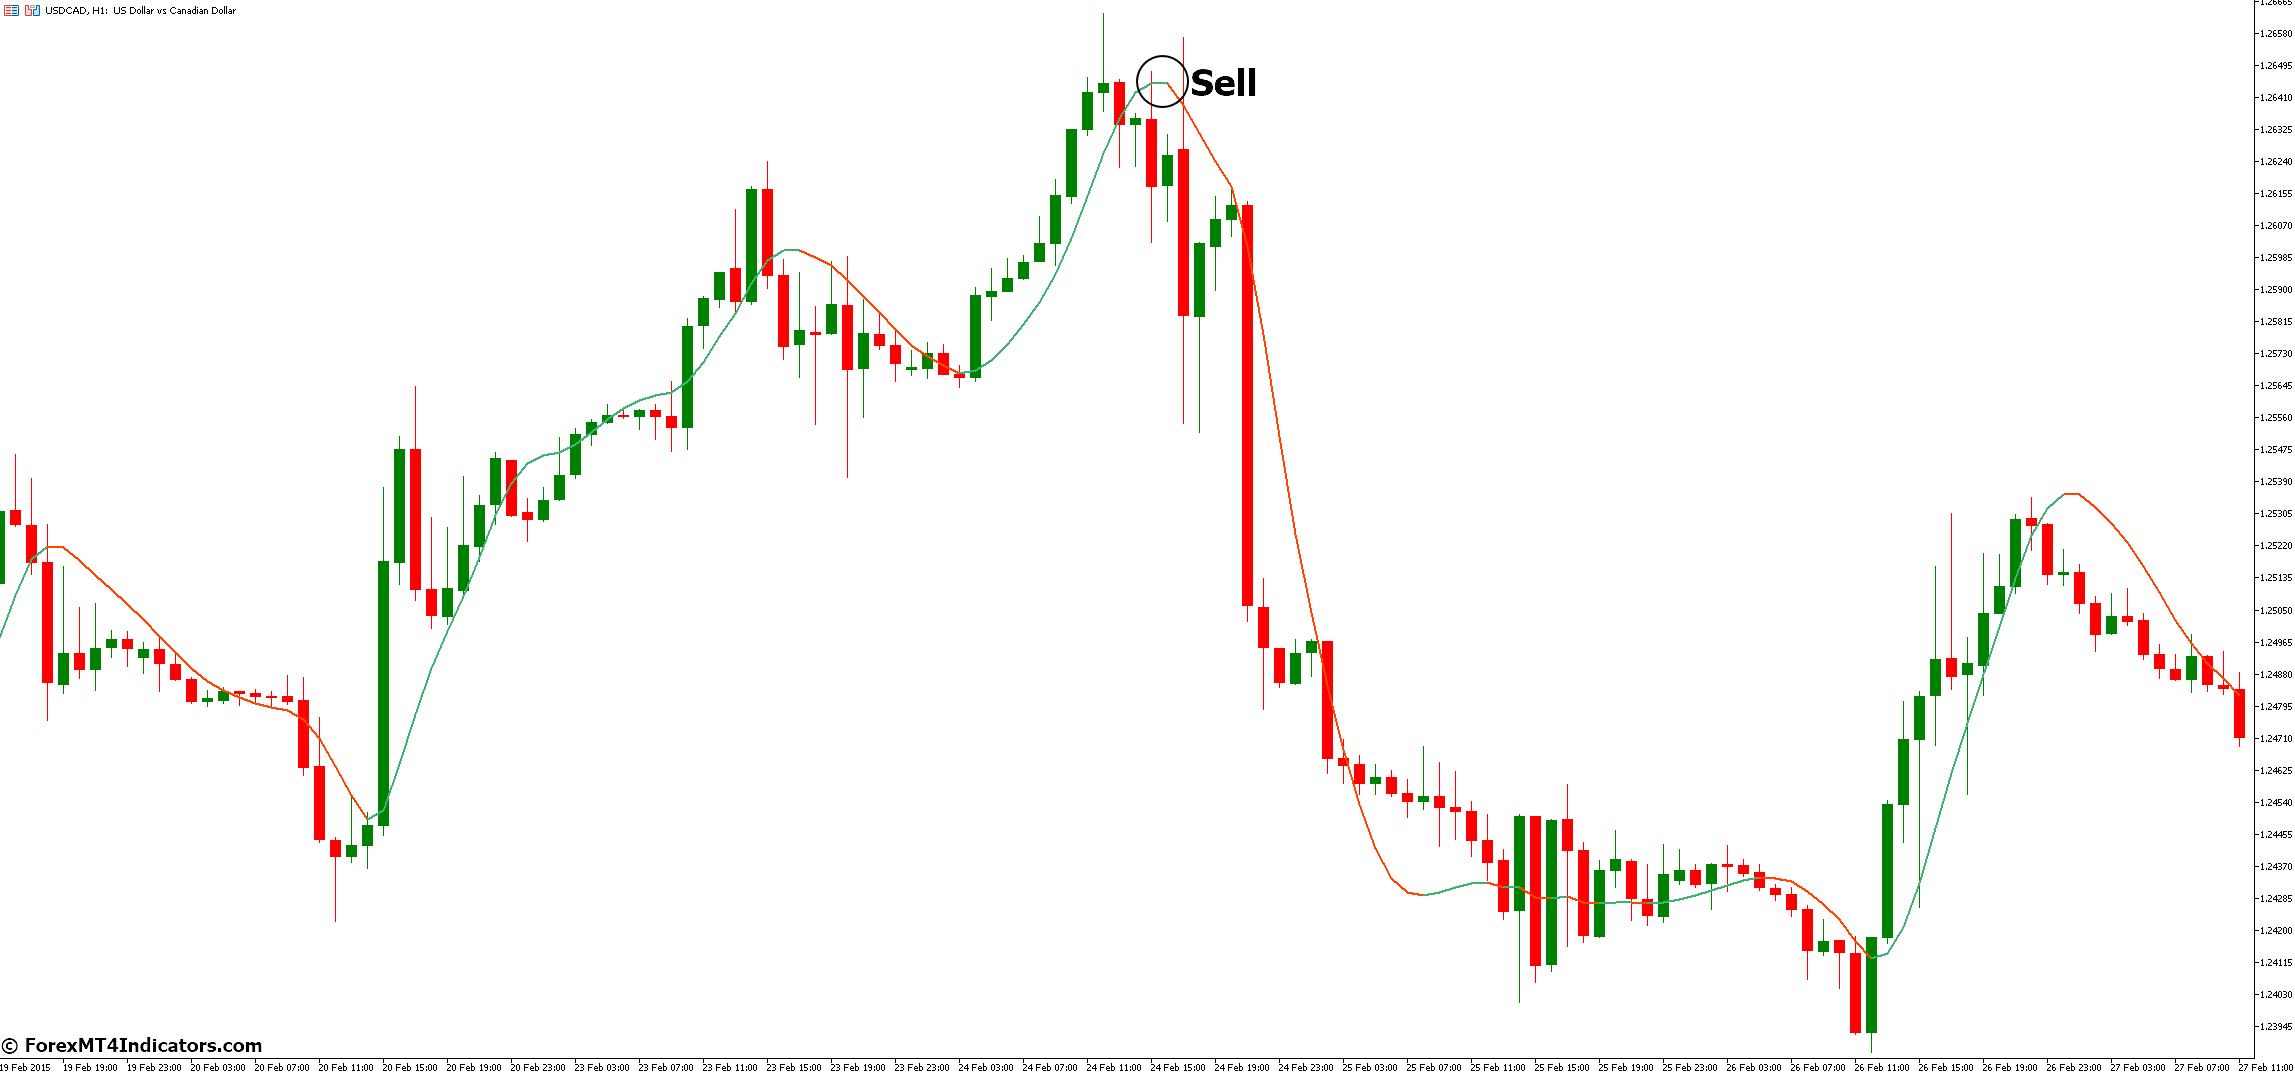 How to Trade with Hull Average 2 MT5 Indicator - Sell Entry